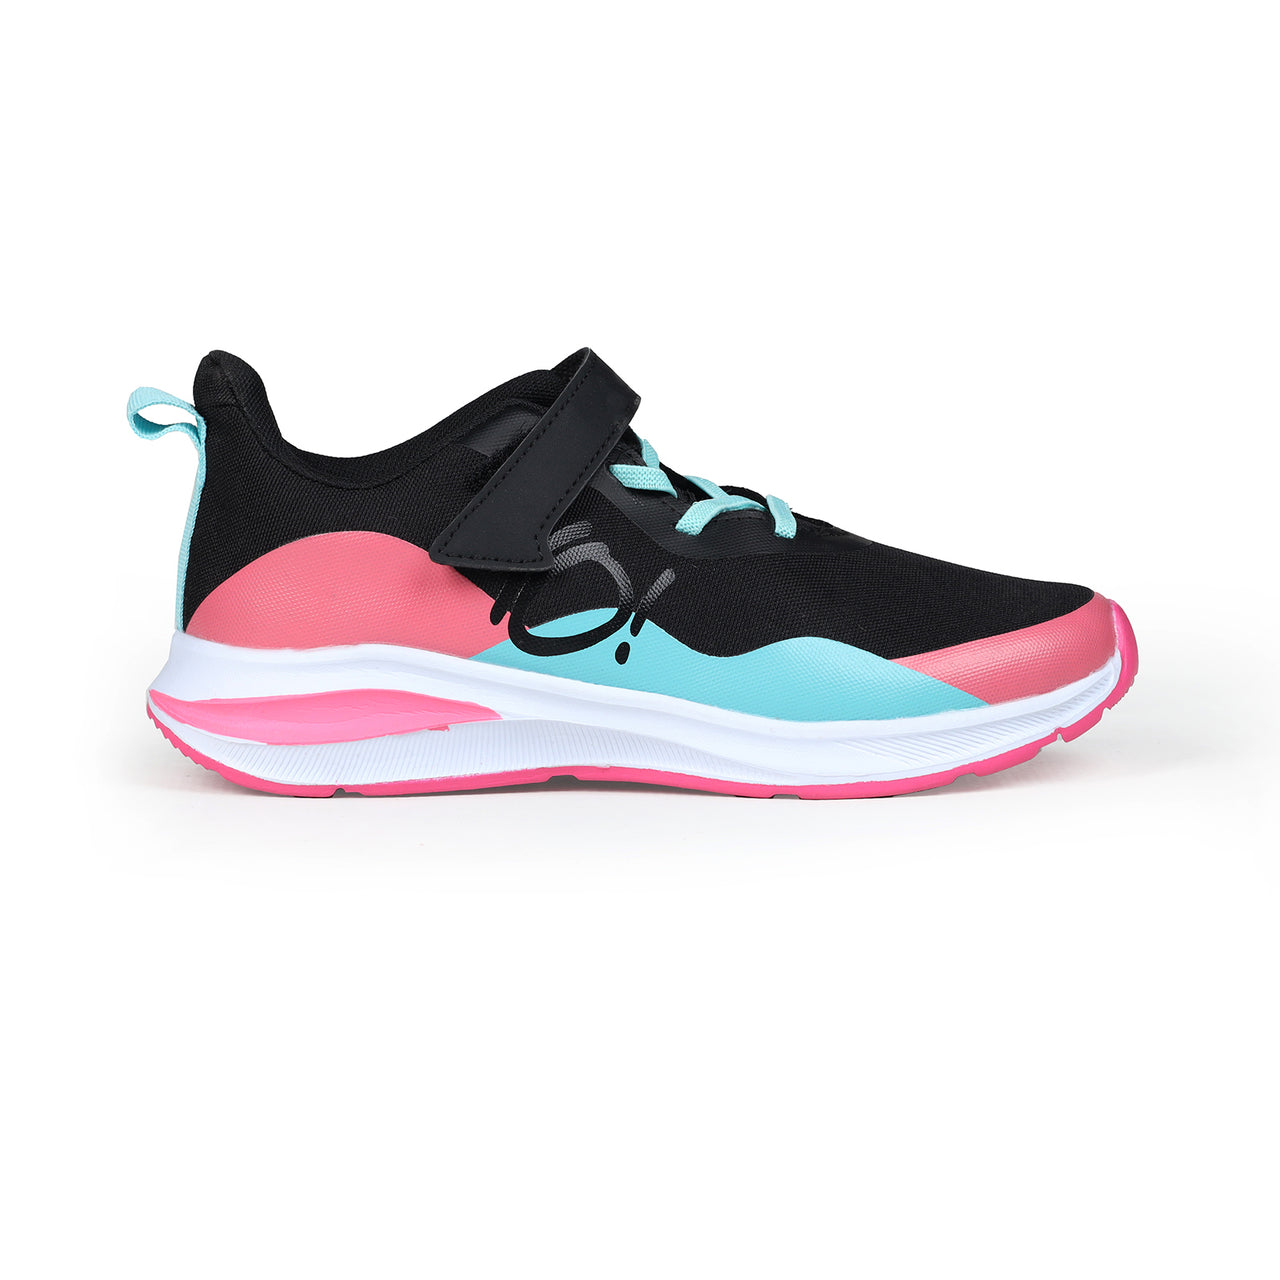 g-gr-0100059-sports shoes